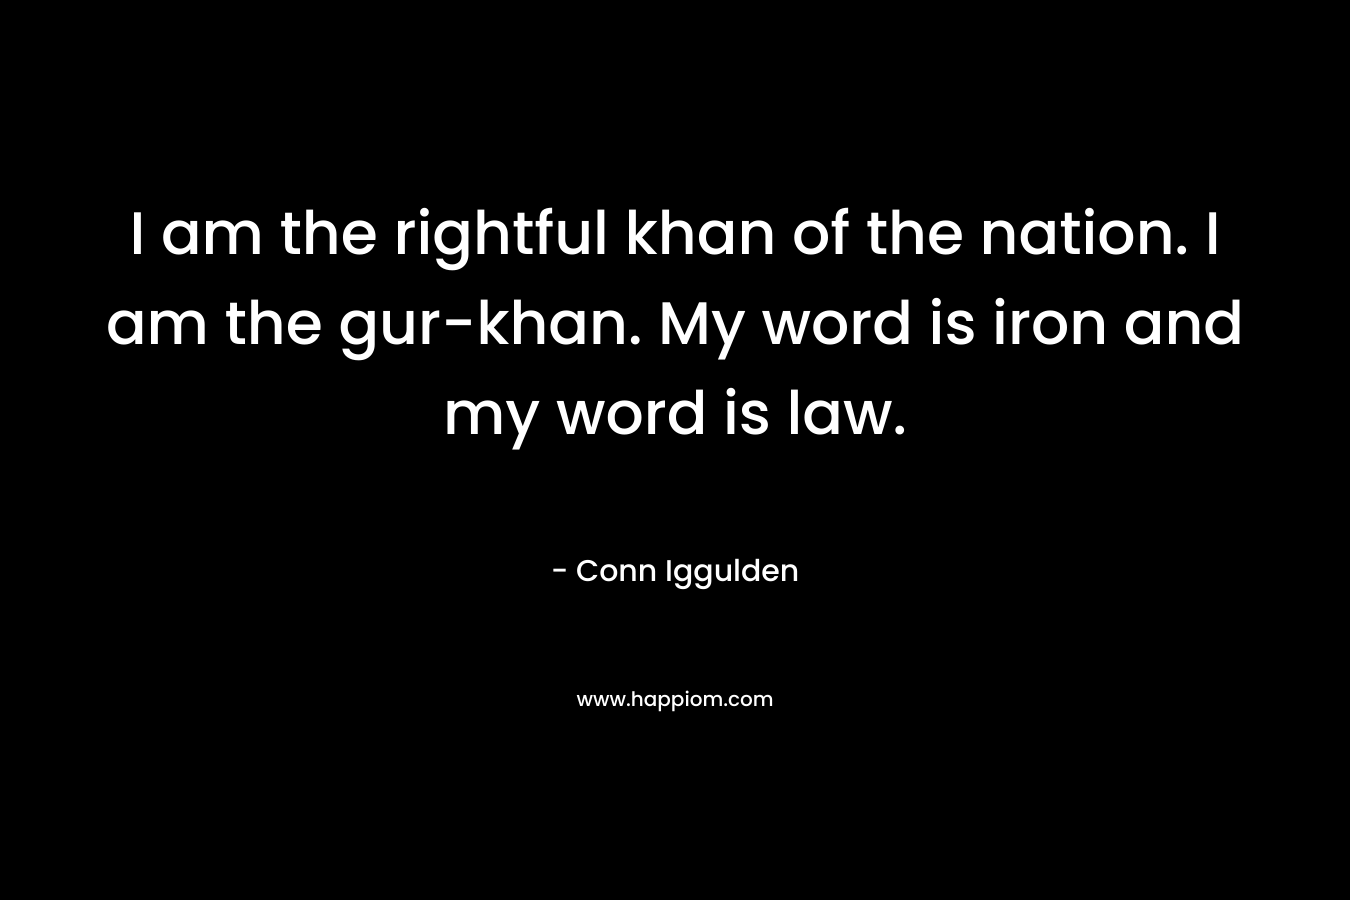 I am the rightful khan of the nation. I am the gur-khan. My word is iron and my word is law.